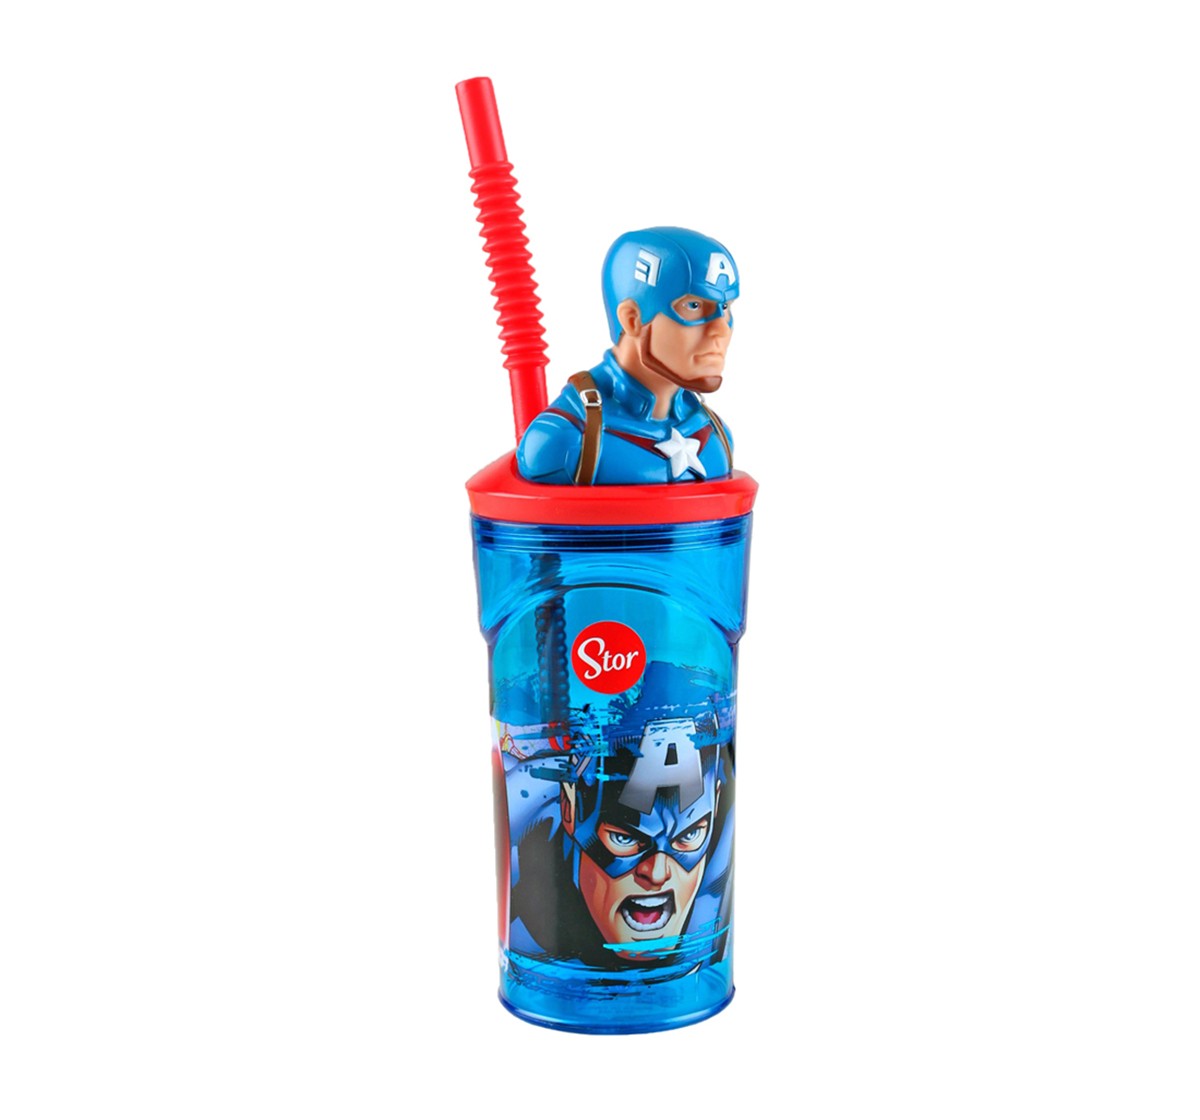 Marvel story 3D Figurine Tumbler Avengers Gallery Captain America, Blue Water Bottles & Sipper for age 3Y+ (Blue),360 ml